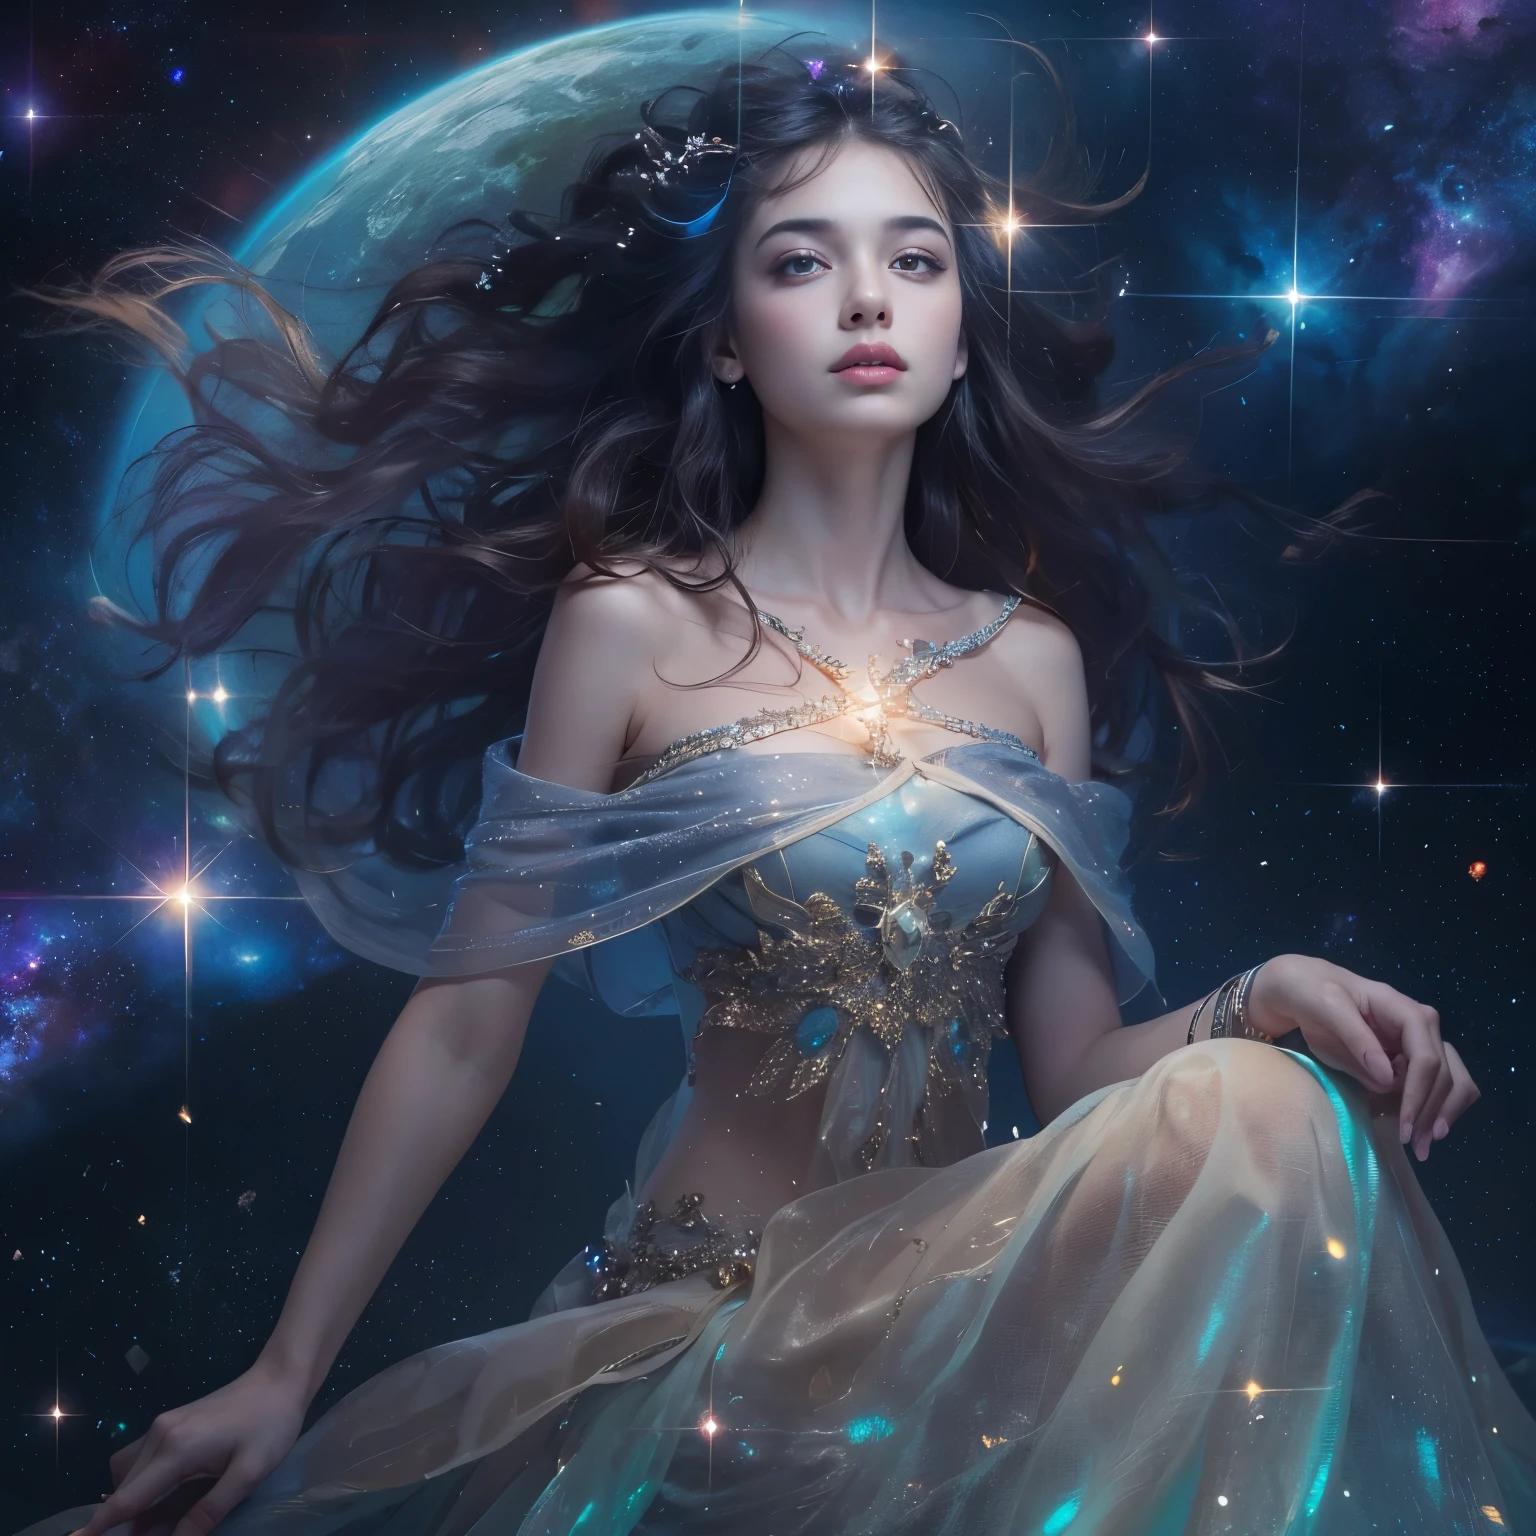 (best quality,4k,highres), the most beautiful girl with mesmerizing eyes,gorgeous galaxy viewing,sparkling stars,soft cosmic colors,ethereal atmosphere,peaceful serenity,celestial wonders,wonderful universe,stellar beauty,romantic stardust,celestial portrait,cosmic perspective,astounding cosmic art,galactic elegance,transcendent charm,celestial goddess,cosmic enchantment,cosmic girl admiring the magnificent galaxy,cosmic dreamworld,galactic reverie,cosmic masterpiece:1.2, moist skin,